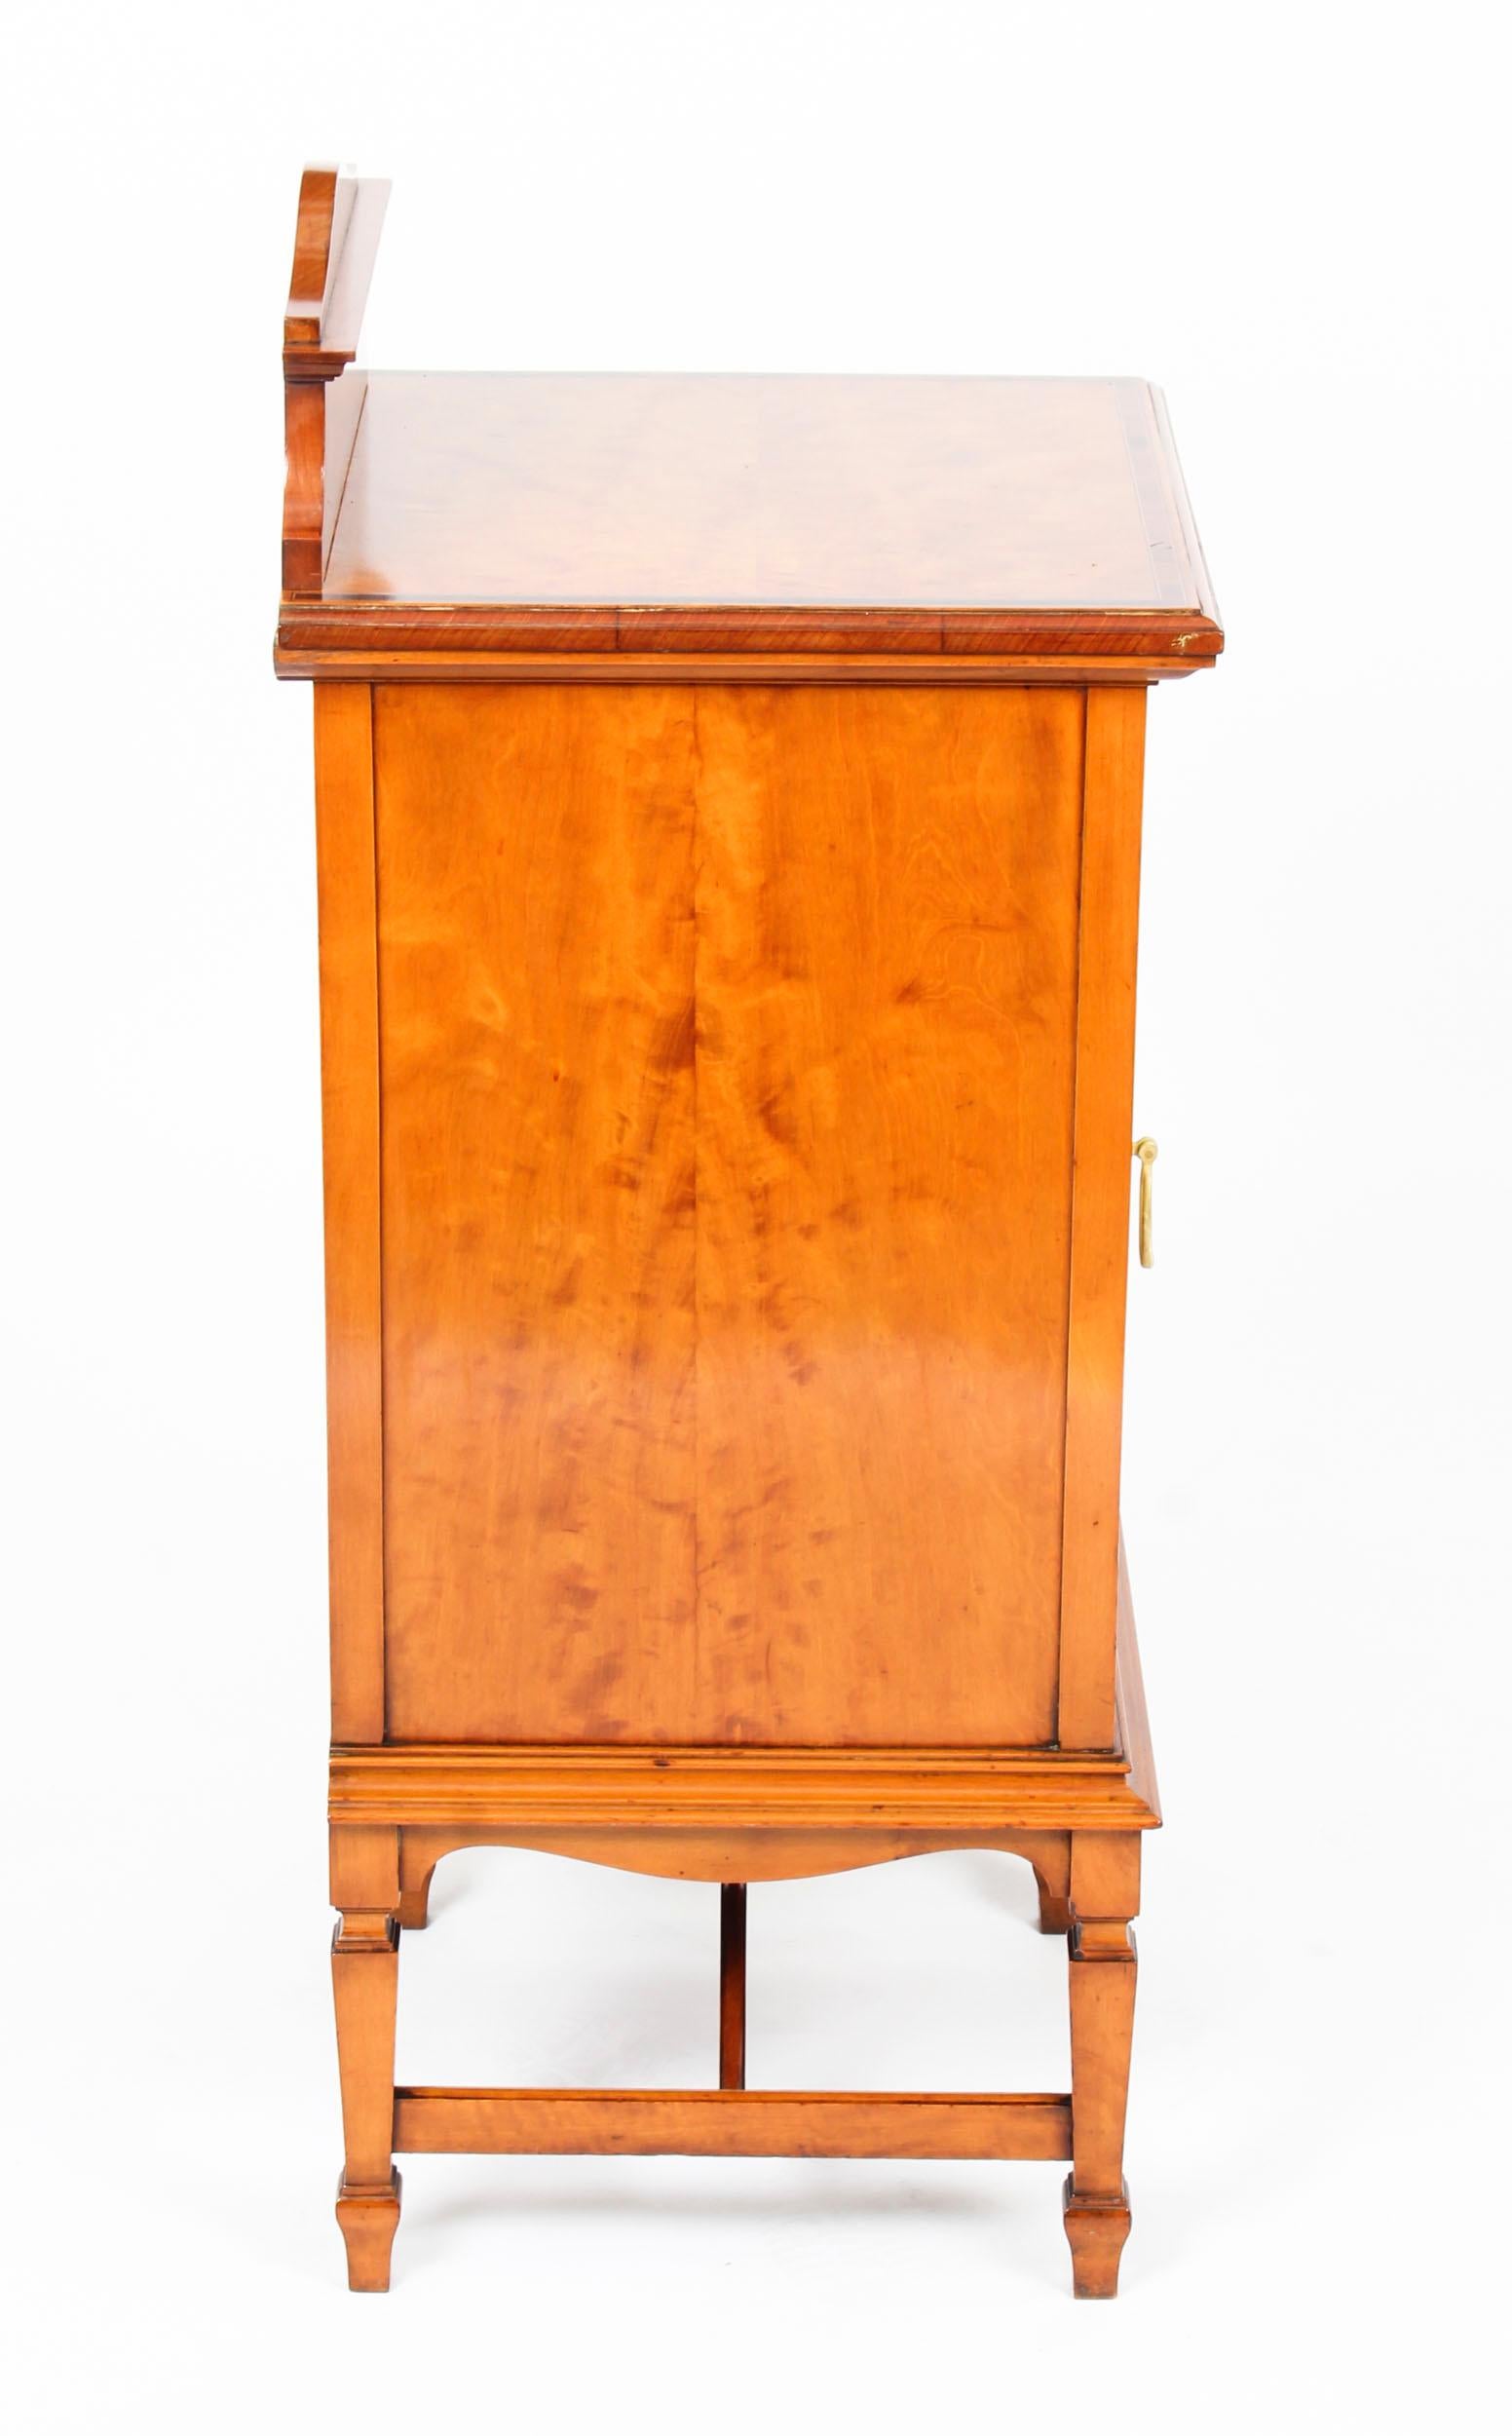 English Antique Victorian Satinwood & Inlaid Bedside Cabinet, 19th Century For Sale